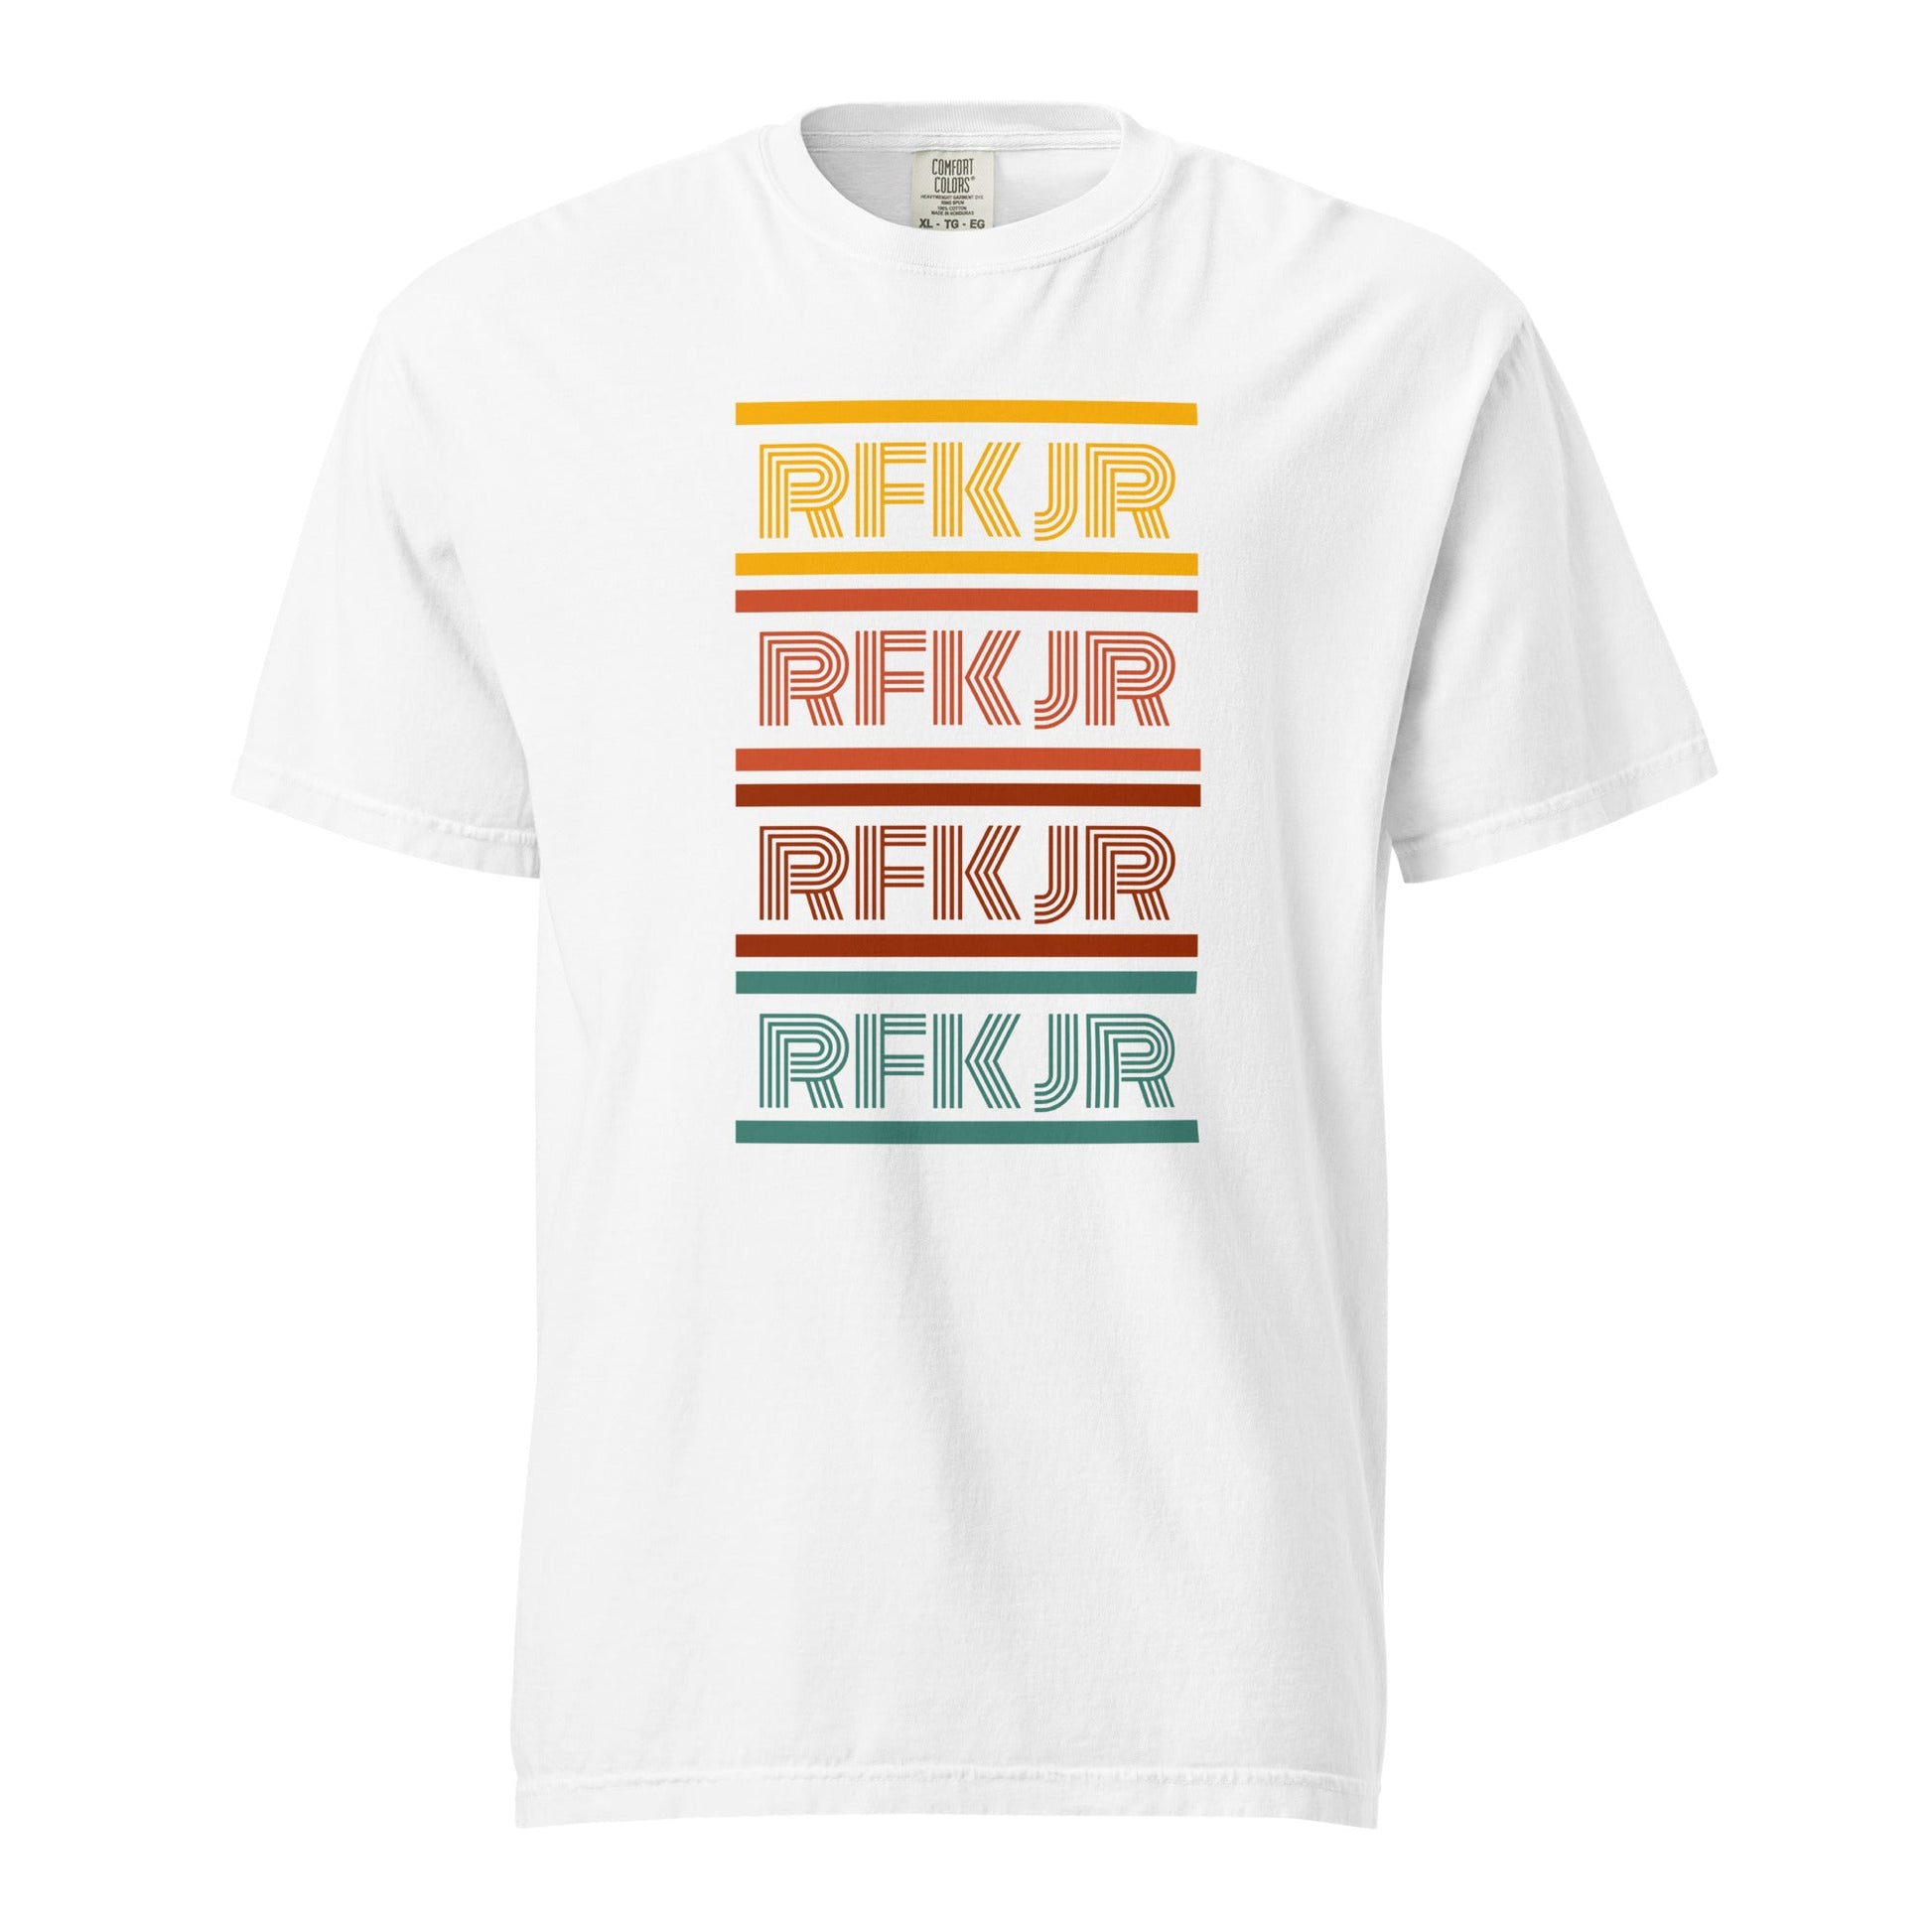 RFK JR. 70's Heavyweight Unisex Tee - TEAM KENNEDY. All rights reserved